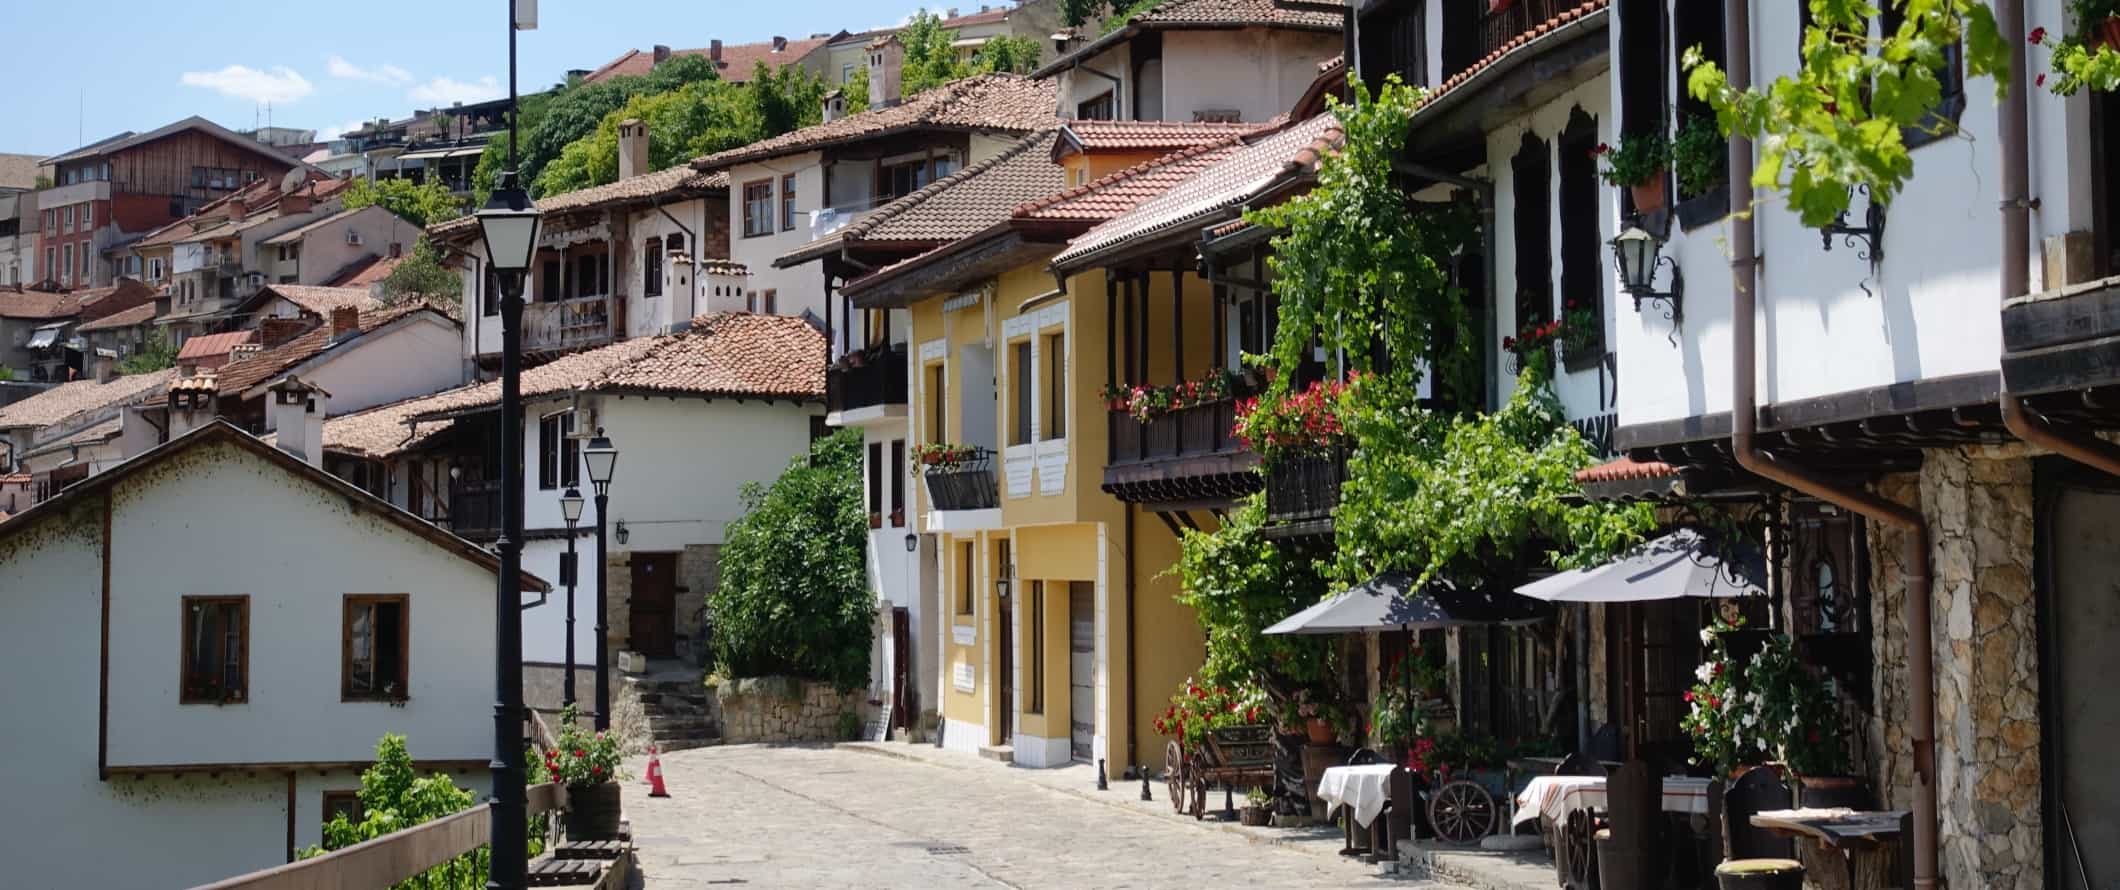 Cobblestone street lined with traditional houses and restaurants in the old town of Veliko Tarnovo, Bulgaria